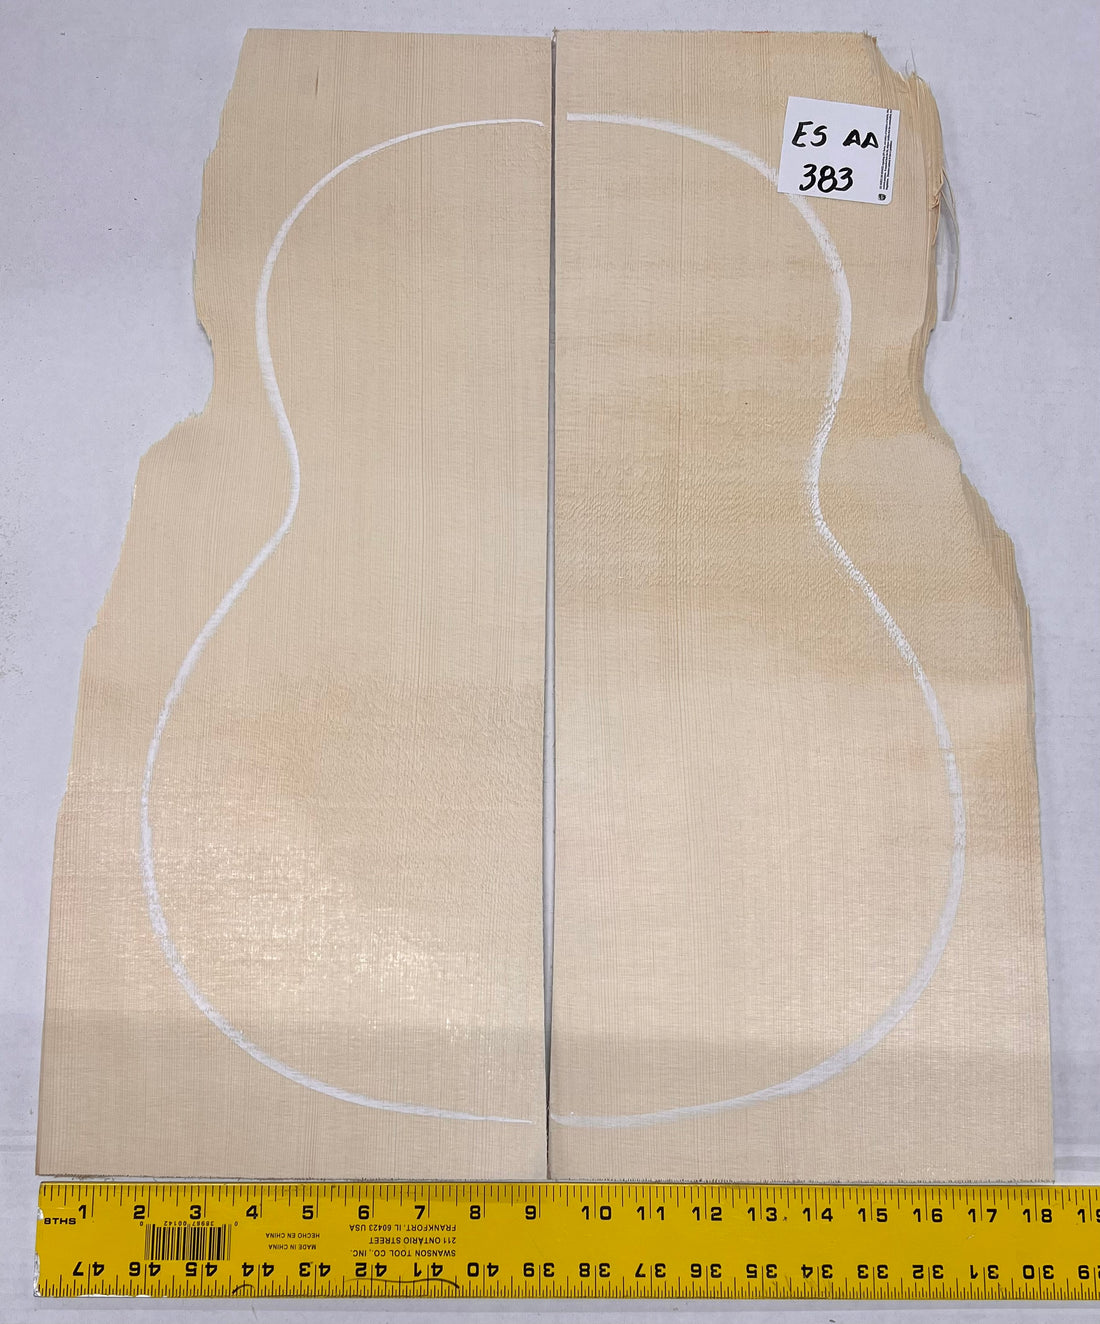 Engelmann Spruce Guitar Top Classical Bookmatched ES AA 